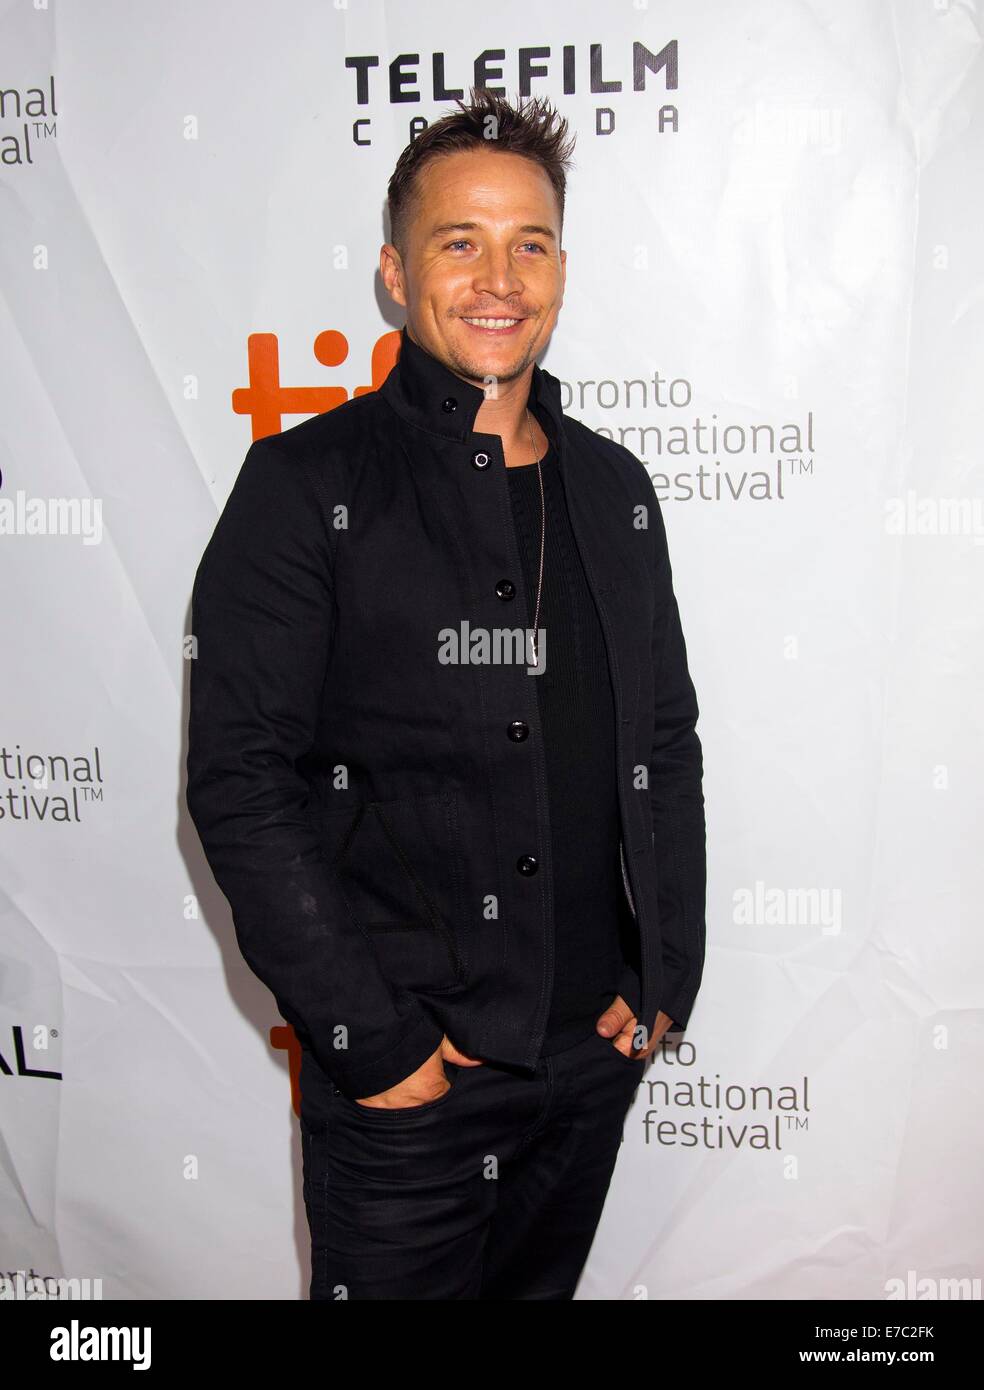 Toronto, Canada. 12th Sep, 2014. Actor Travis Wade poses for photos before the premiere of the film 'The Forger' at Roy Thompson Hall during the 39th Toronto International Film Festival in Toronto, Canada, Sept. 12, 2014. Credit:  Zou Zheng/Xinhua/Alamy Live News Stock Photo